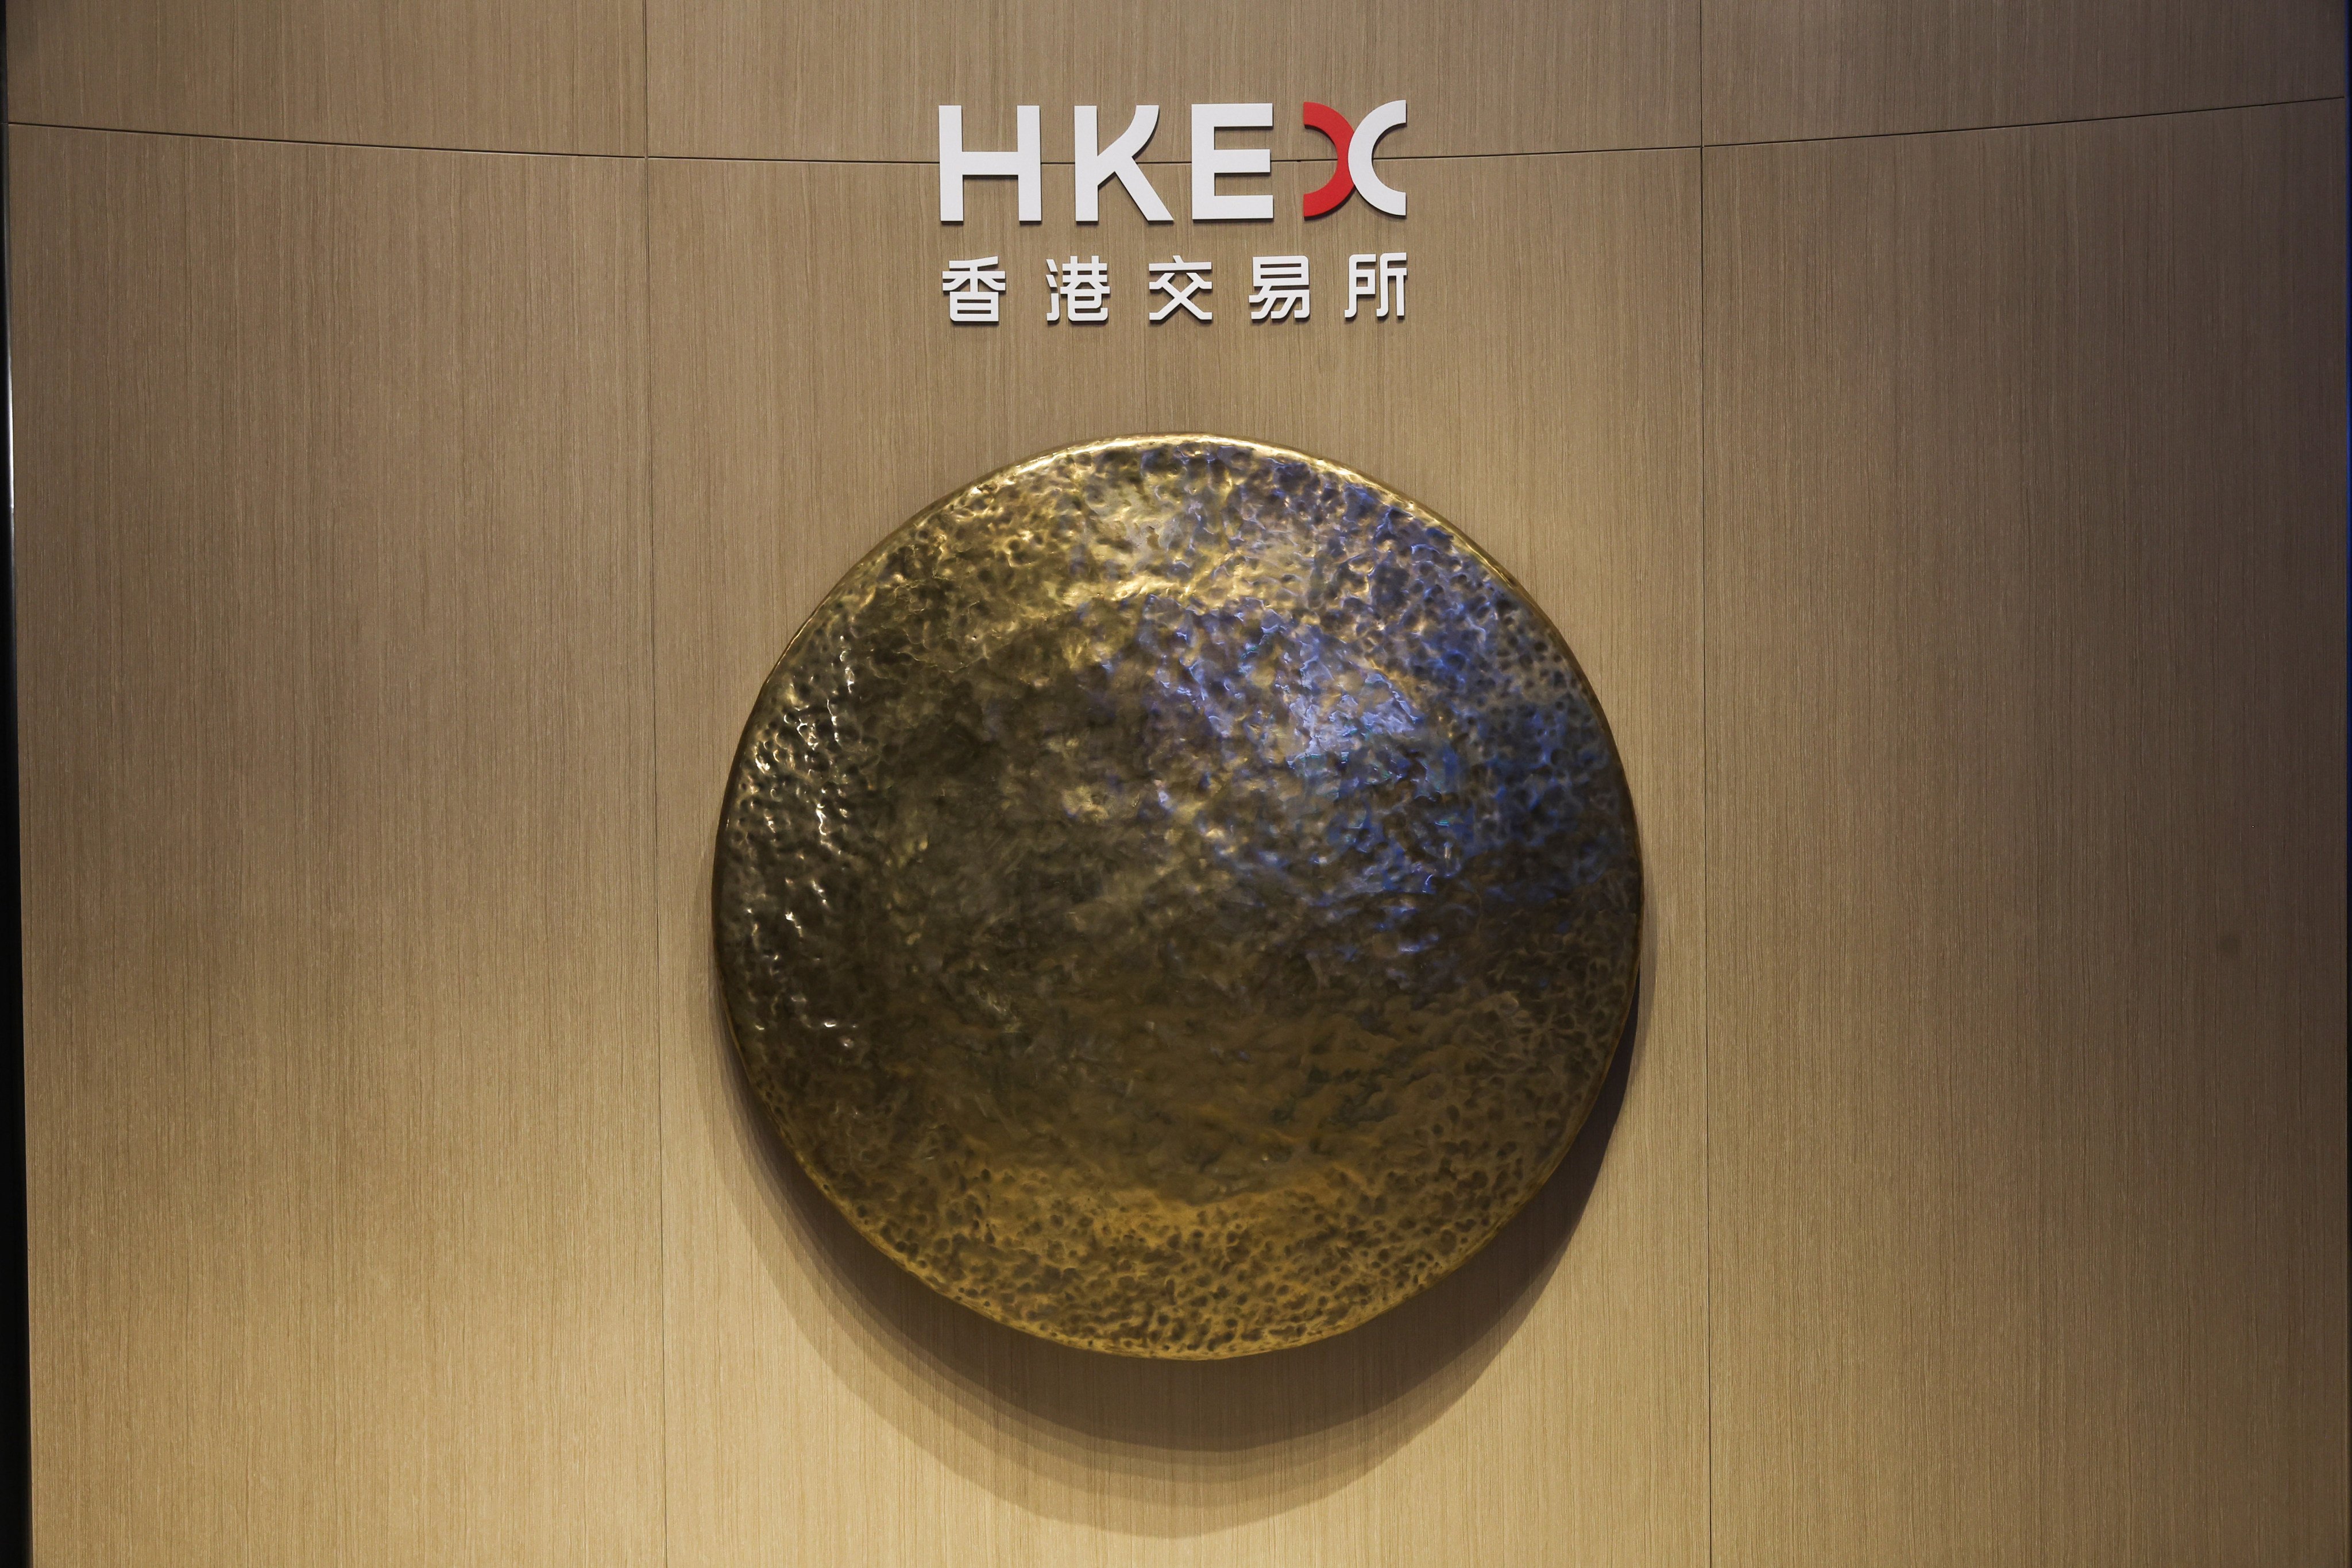 More companies are lining up to launch IPOs in Hong Kong amid improving market sentiment. Photo: Edmond So